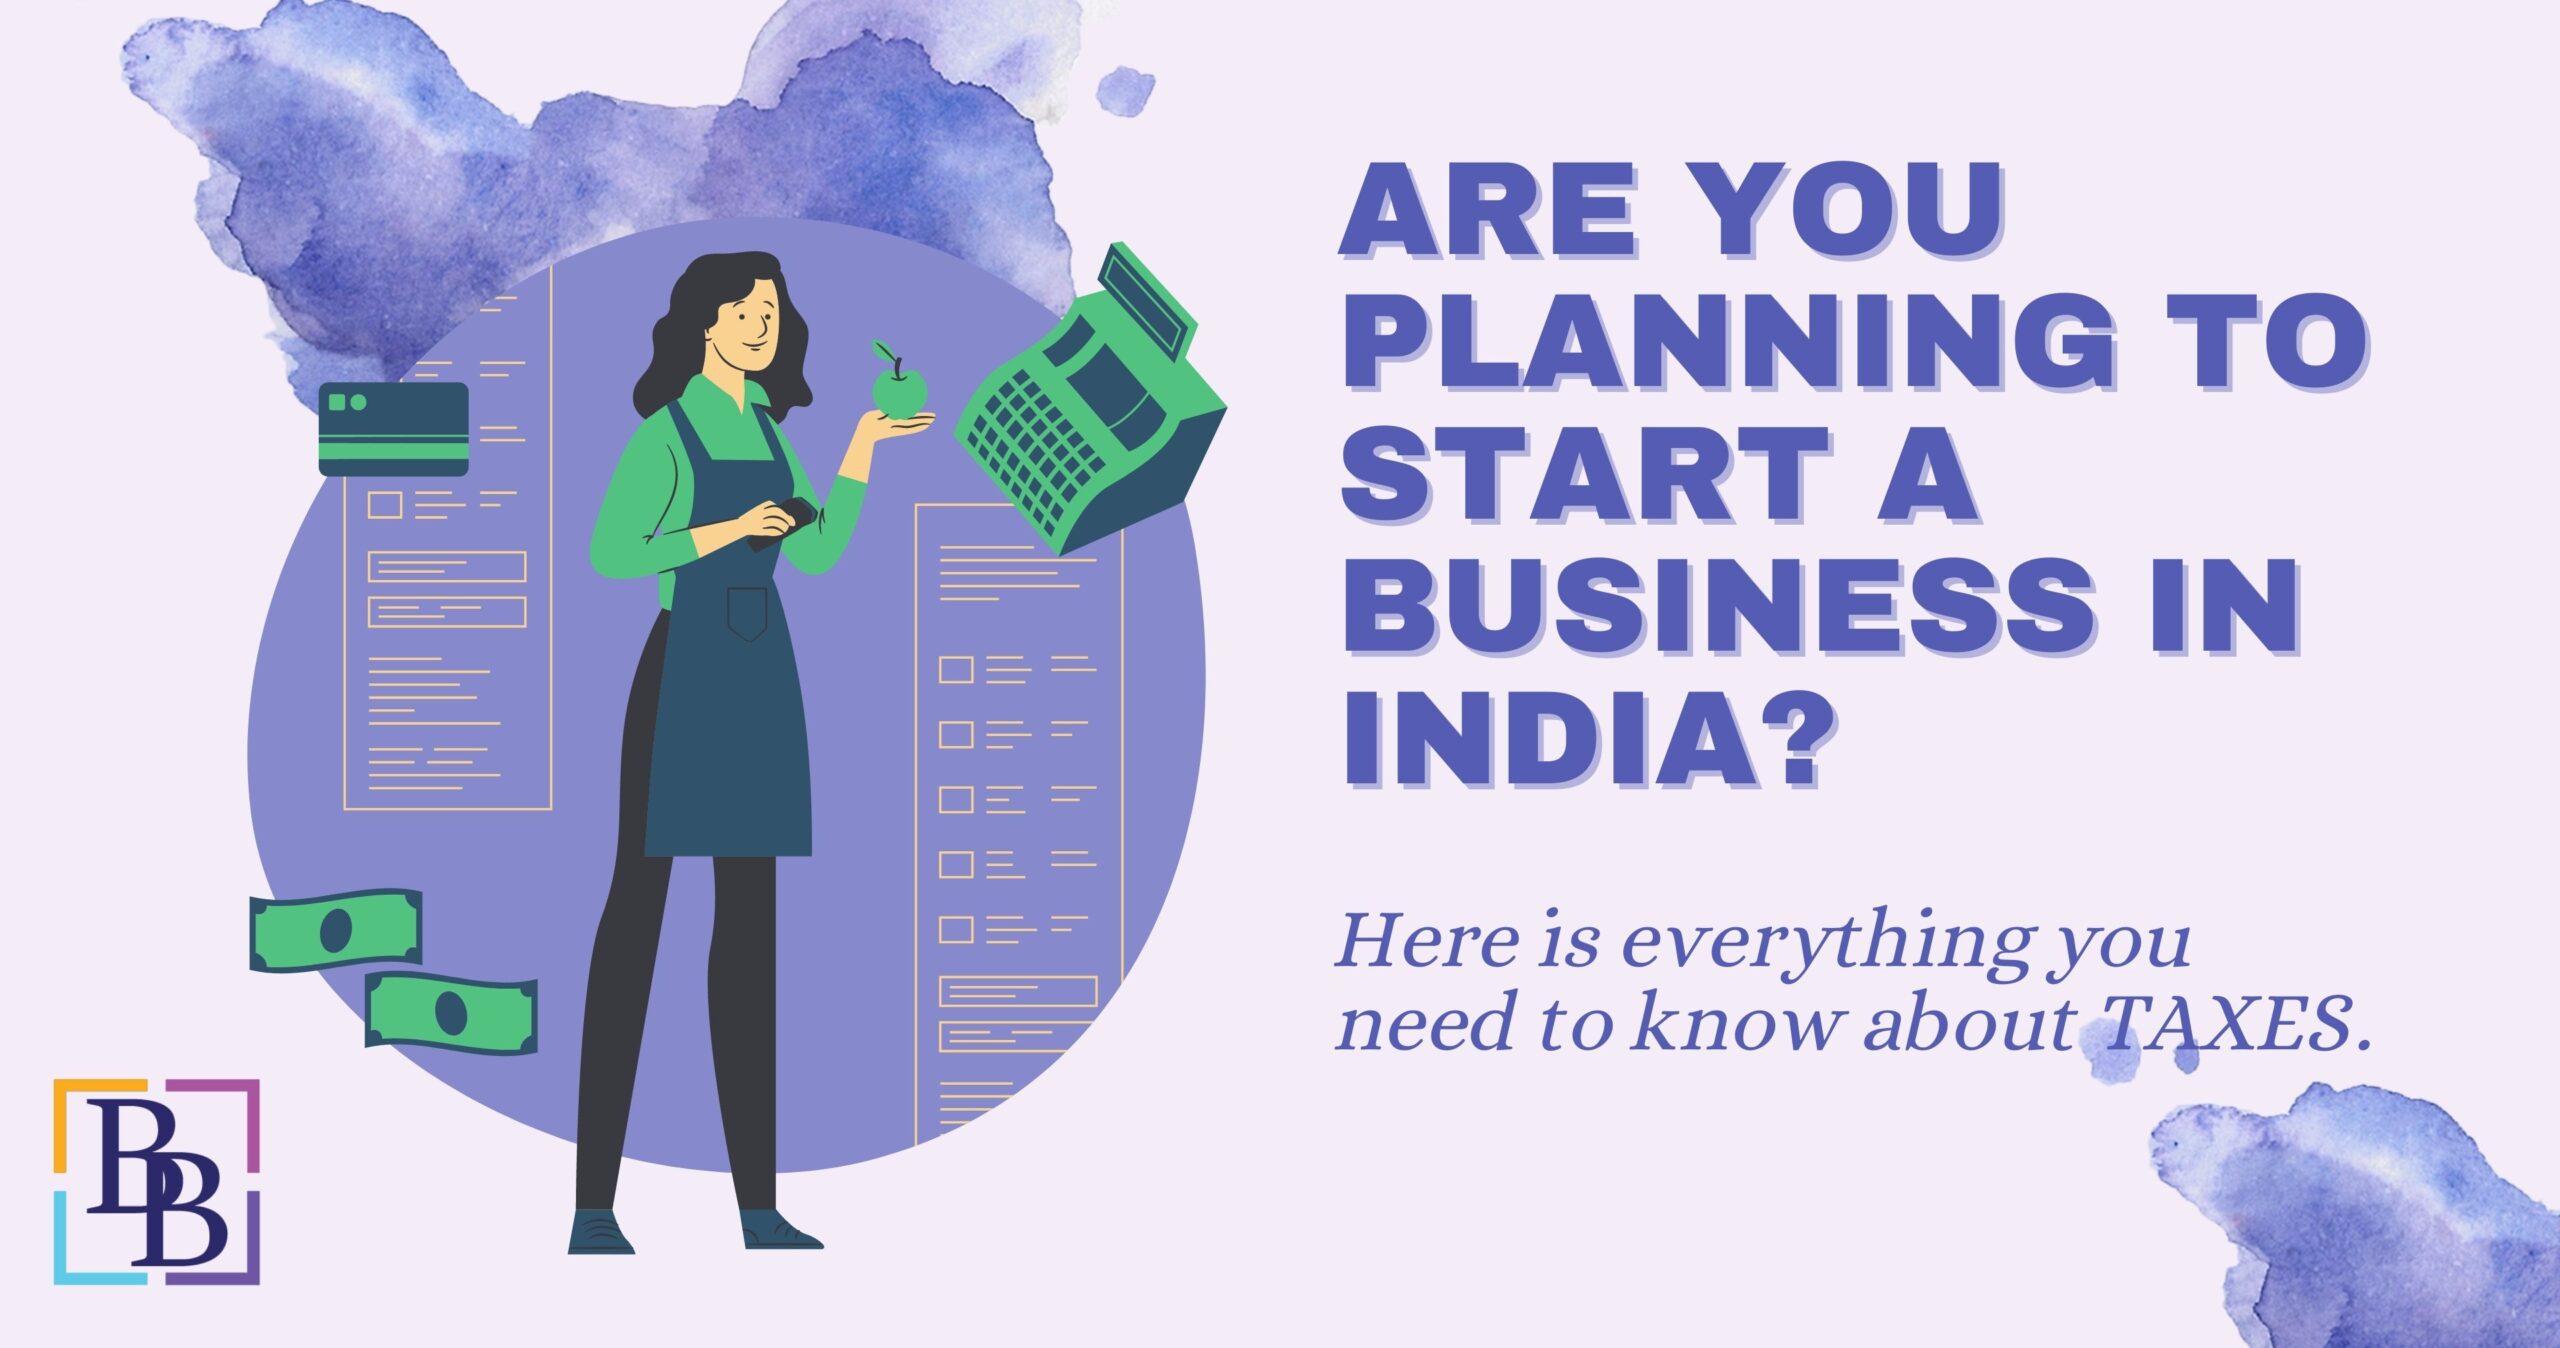 Everything you need to know about business tax in India before starting a buisness